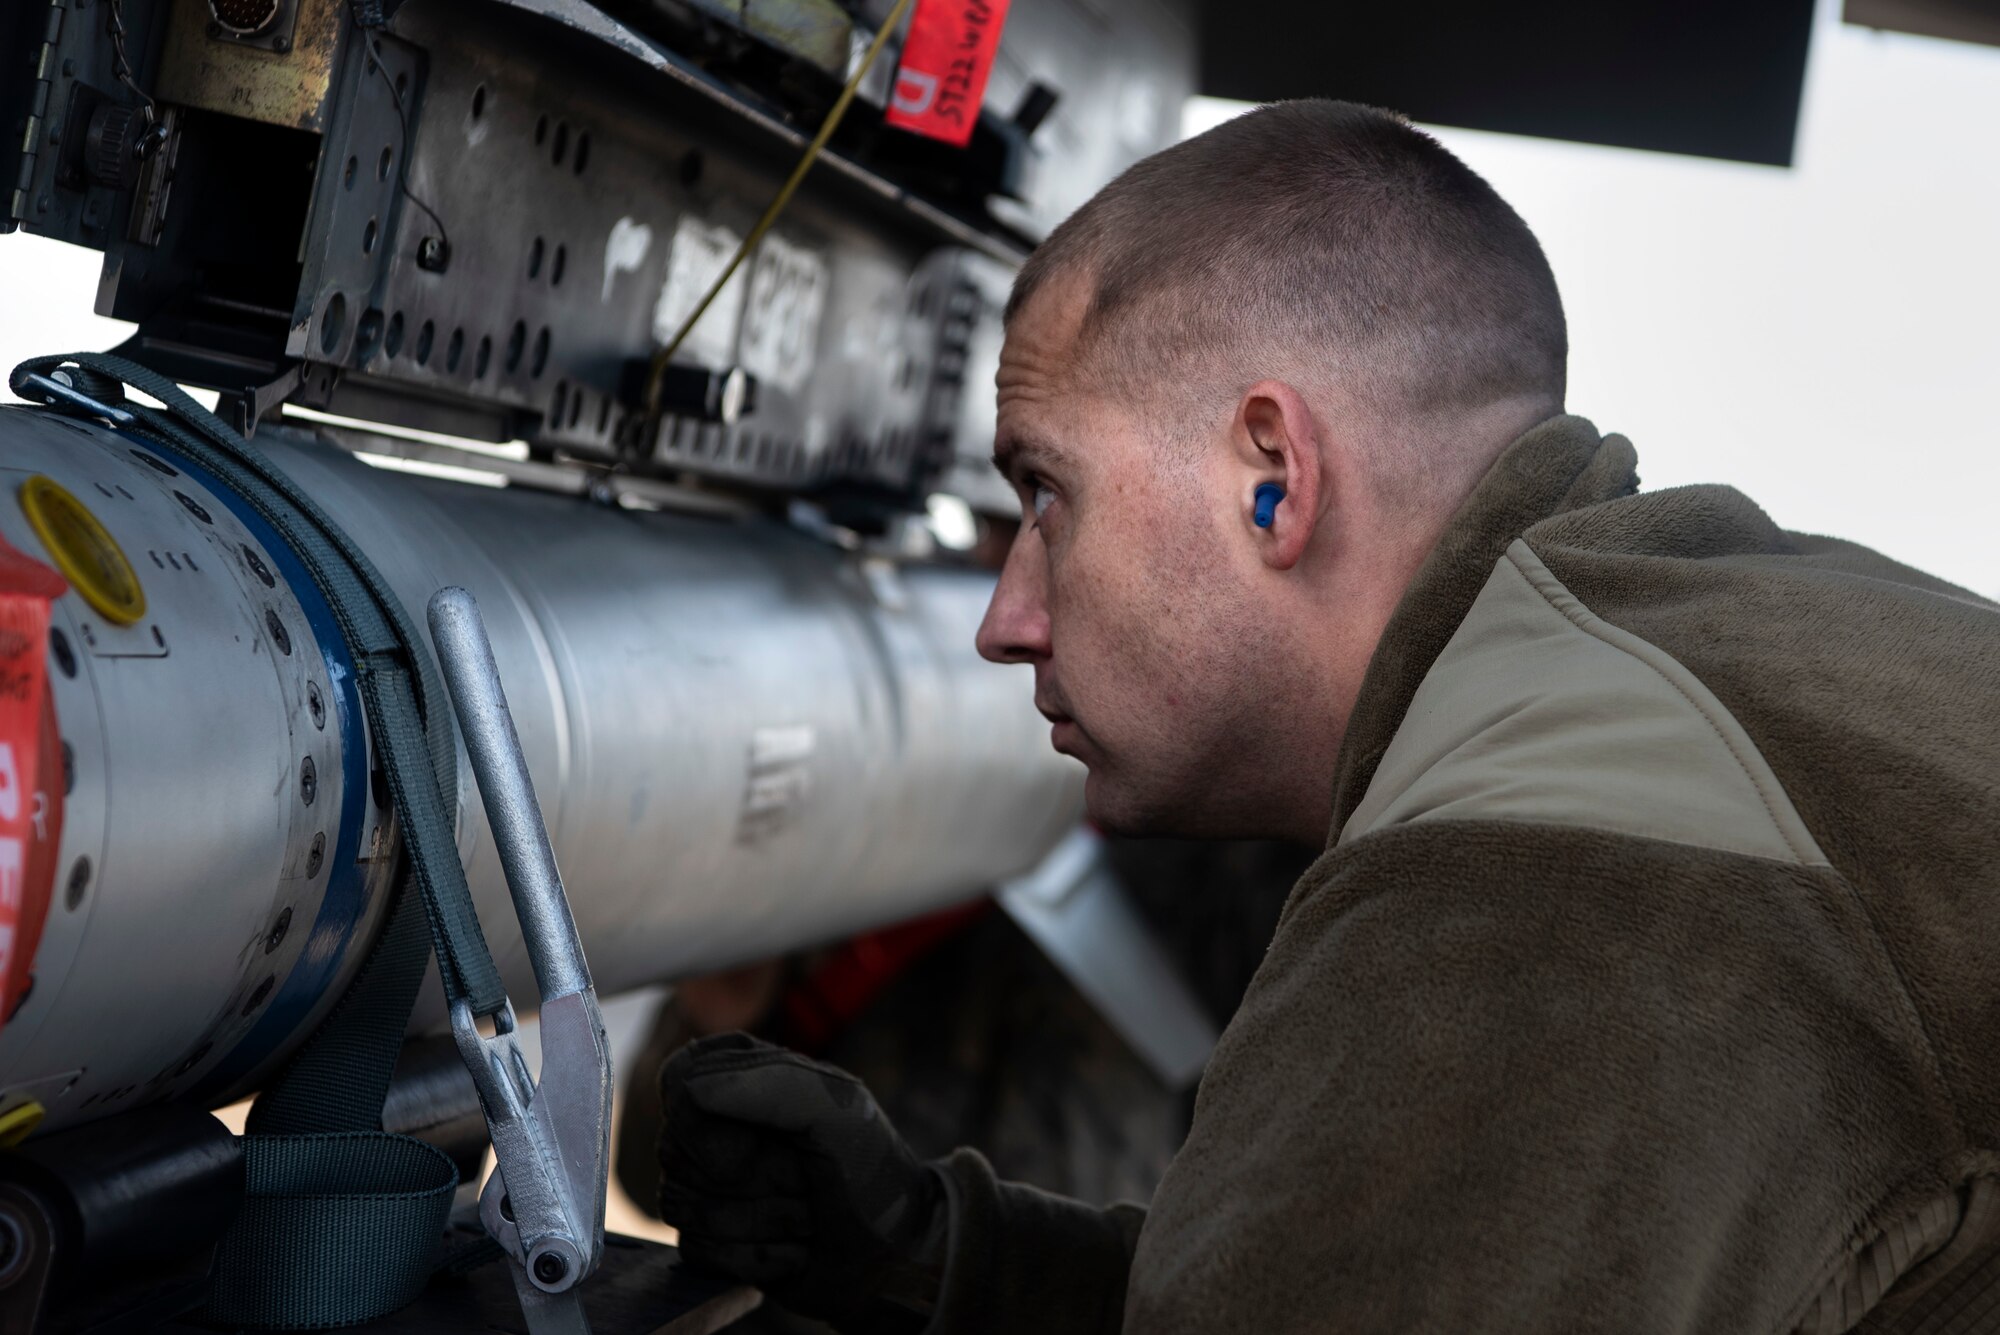 U.S. Air Force Tech. Sgt. Benjamin Angley, 52nd Aircraft Maintenance Squadron weapons load team chief, loads munitions onto an F-16 Fighting Falcon at Spangdahlem Air Base, Germany, Dec. 17, 2019. Angley participated in an Agile Combat Employment exercise to ensure U.S. Air Forces in Europe are ready for potential threats. (U.S. Air Force photo by Airman 1st Class Valerie Seelye)